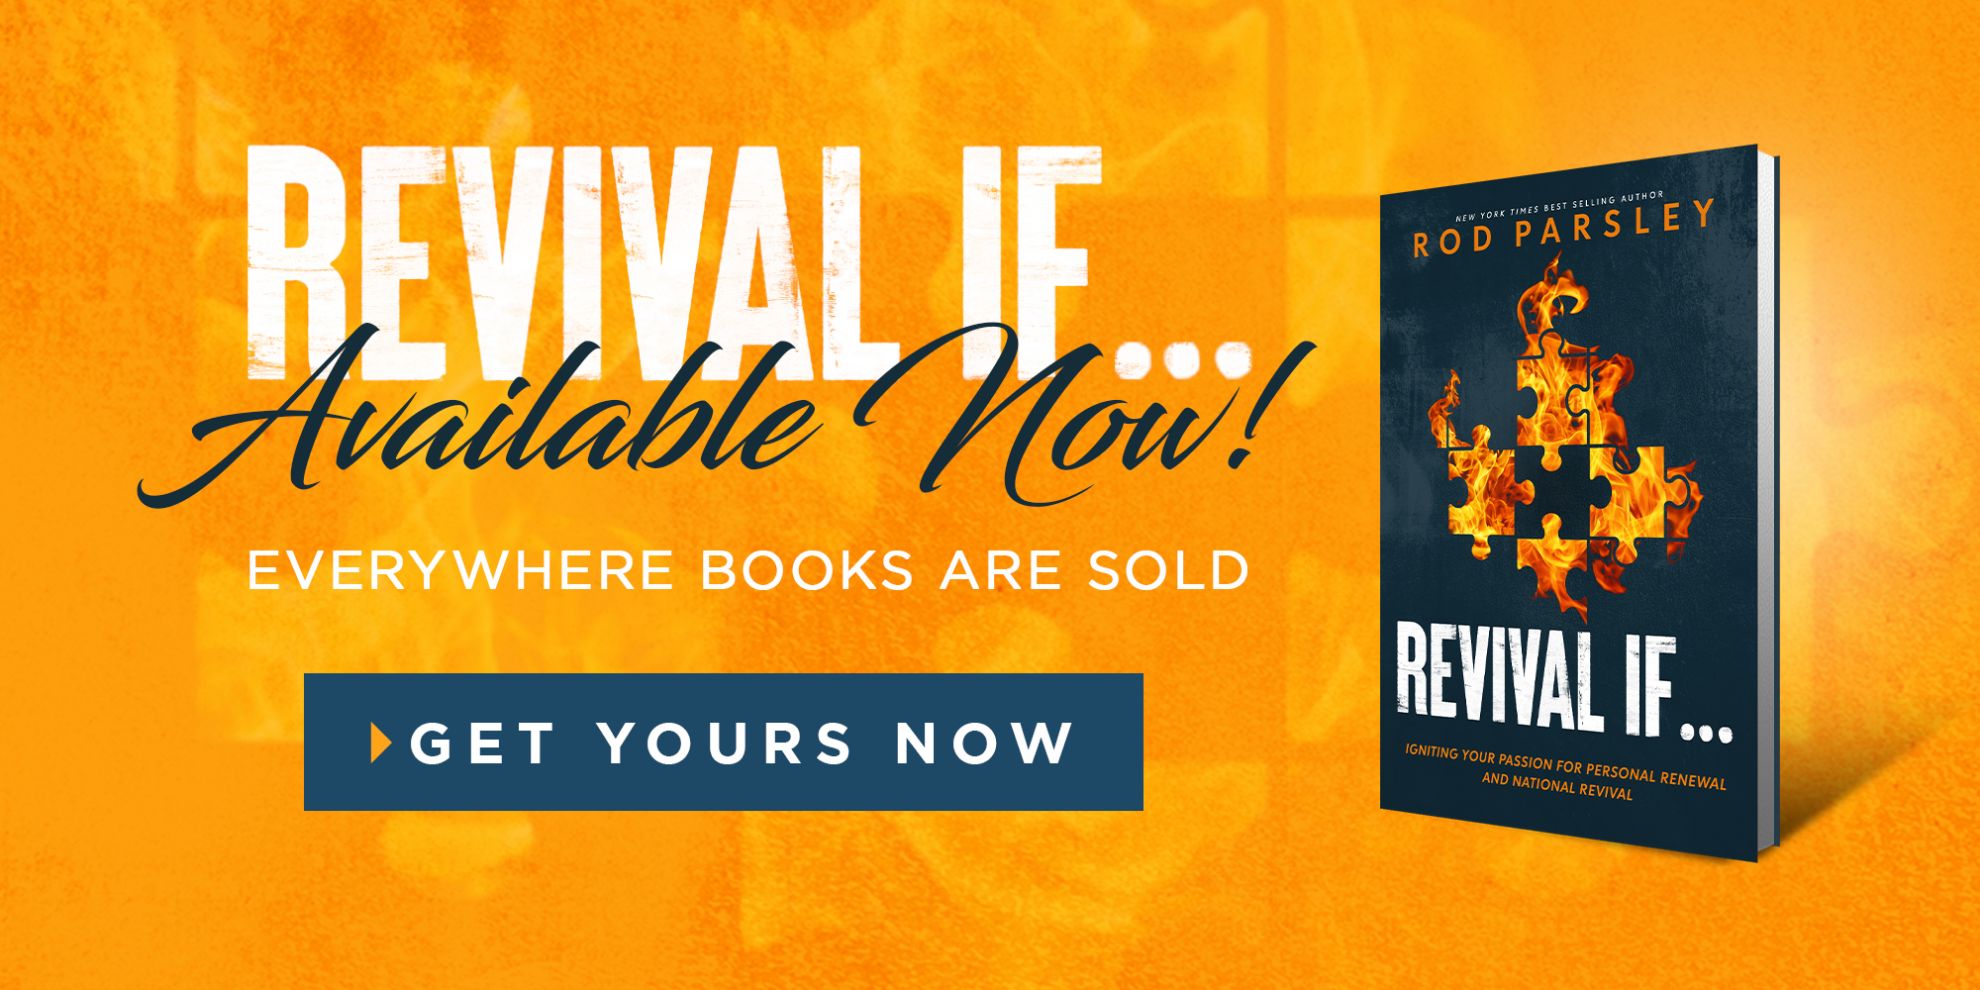 Revival If... Igniting Your Passion for Personal Renewal and National Revival